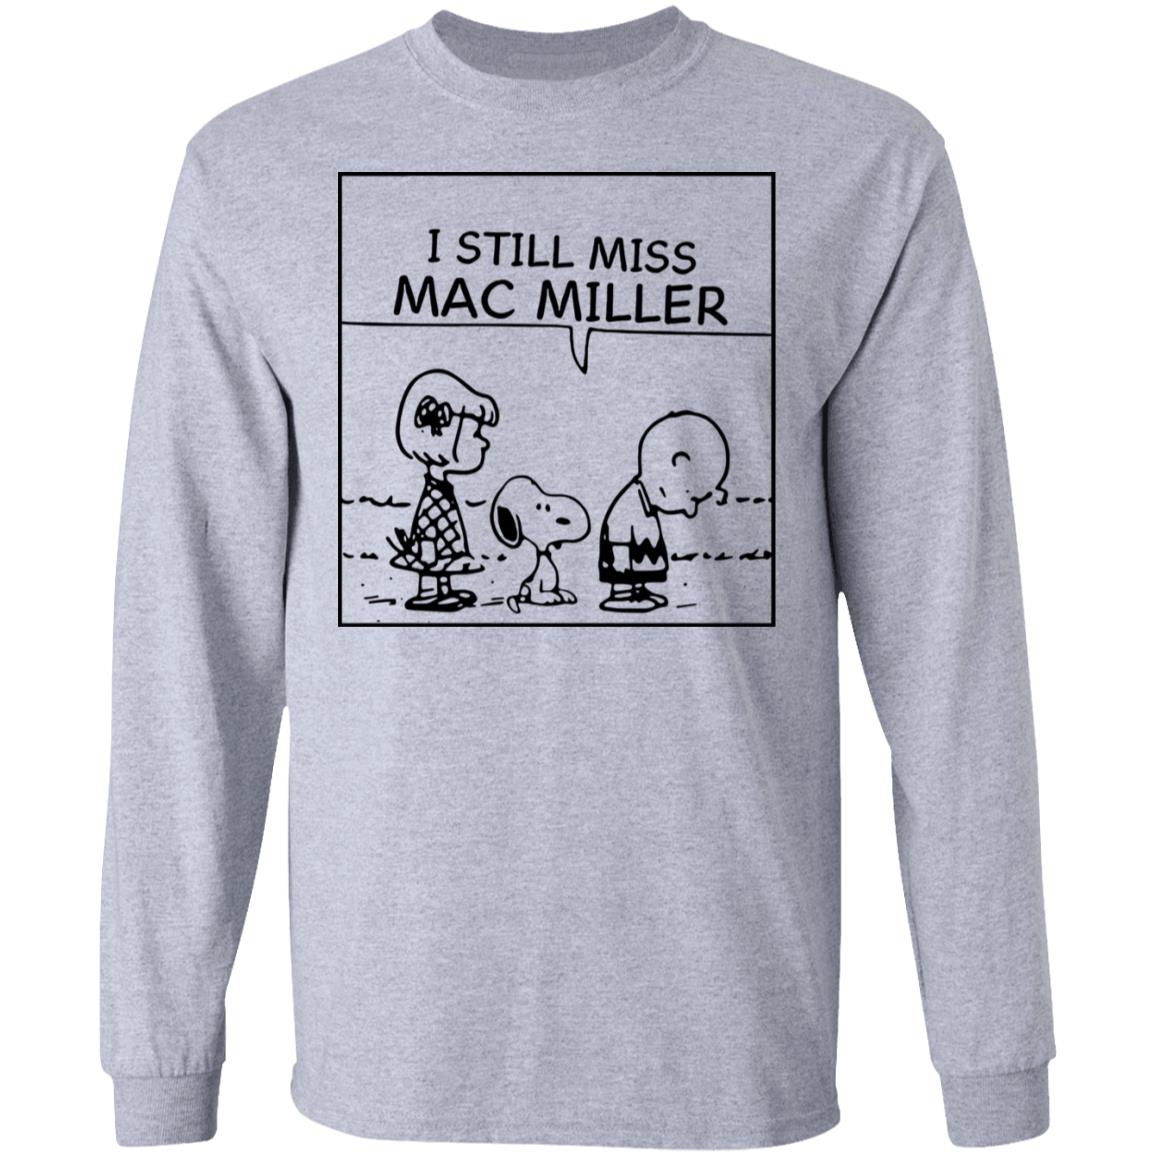 Charlie Brown and Snoopy I still miss Mac Miller shirt